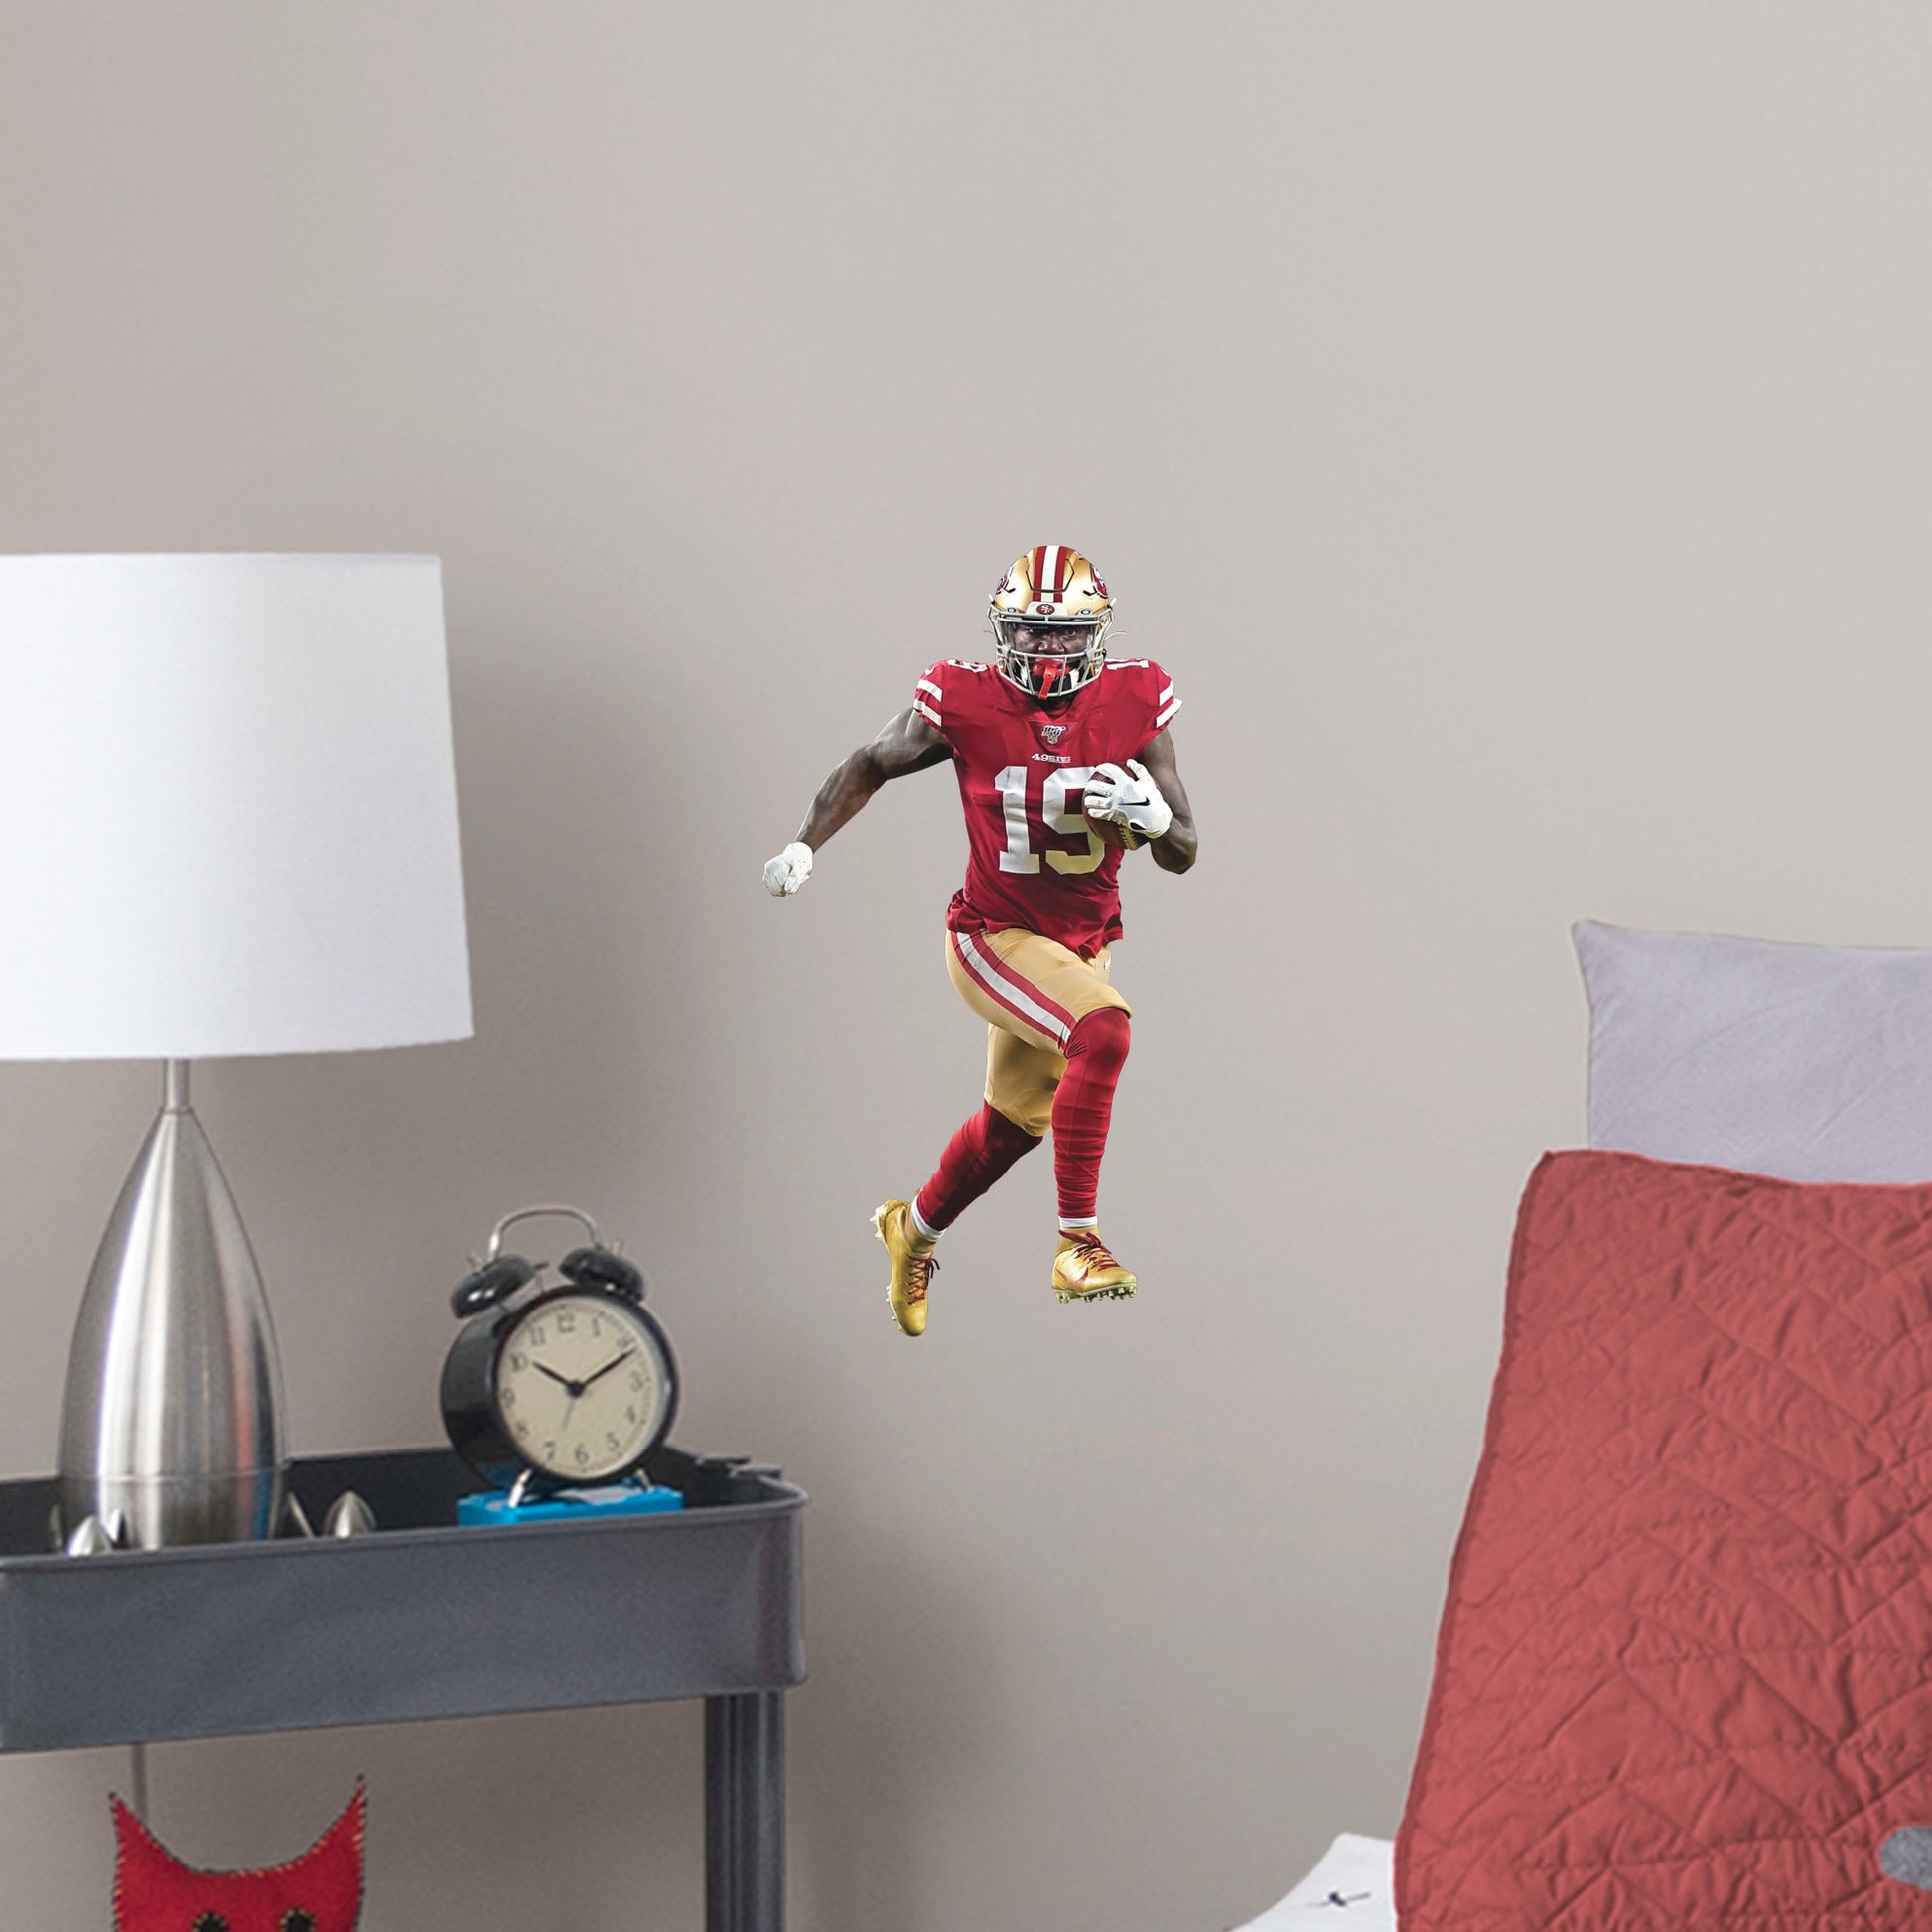 Large Athlete + 2 Decals (9"W x 17"H) Deebo Samuel is one of the most exciting players in the NFL and you can show your support with this high-quality removable wall decal! Place this durable vinyl decal on any wall and wide receiver Deebo can dominate your room, office, or man cave like he helps the San Francisco 49ers dominate the league! This decal can be easily applied and removed on almost any surface, so this speedster can follow you everywhere you go! Let���s go, Niners!